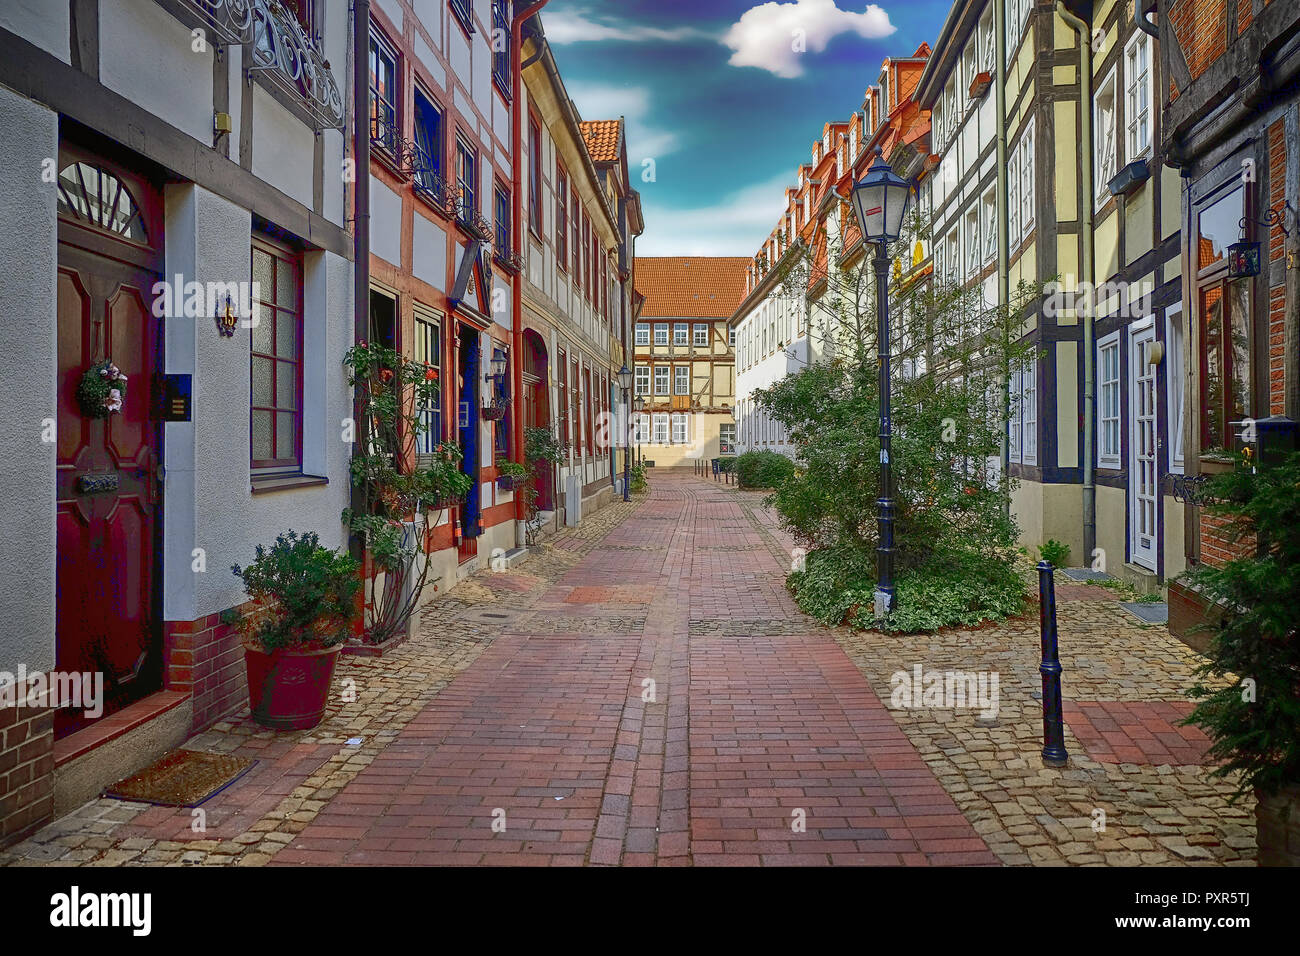 Historical city center and traditional houses of Hameln/Hamelin, Germany during sunny weather Stock Photo